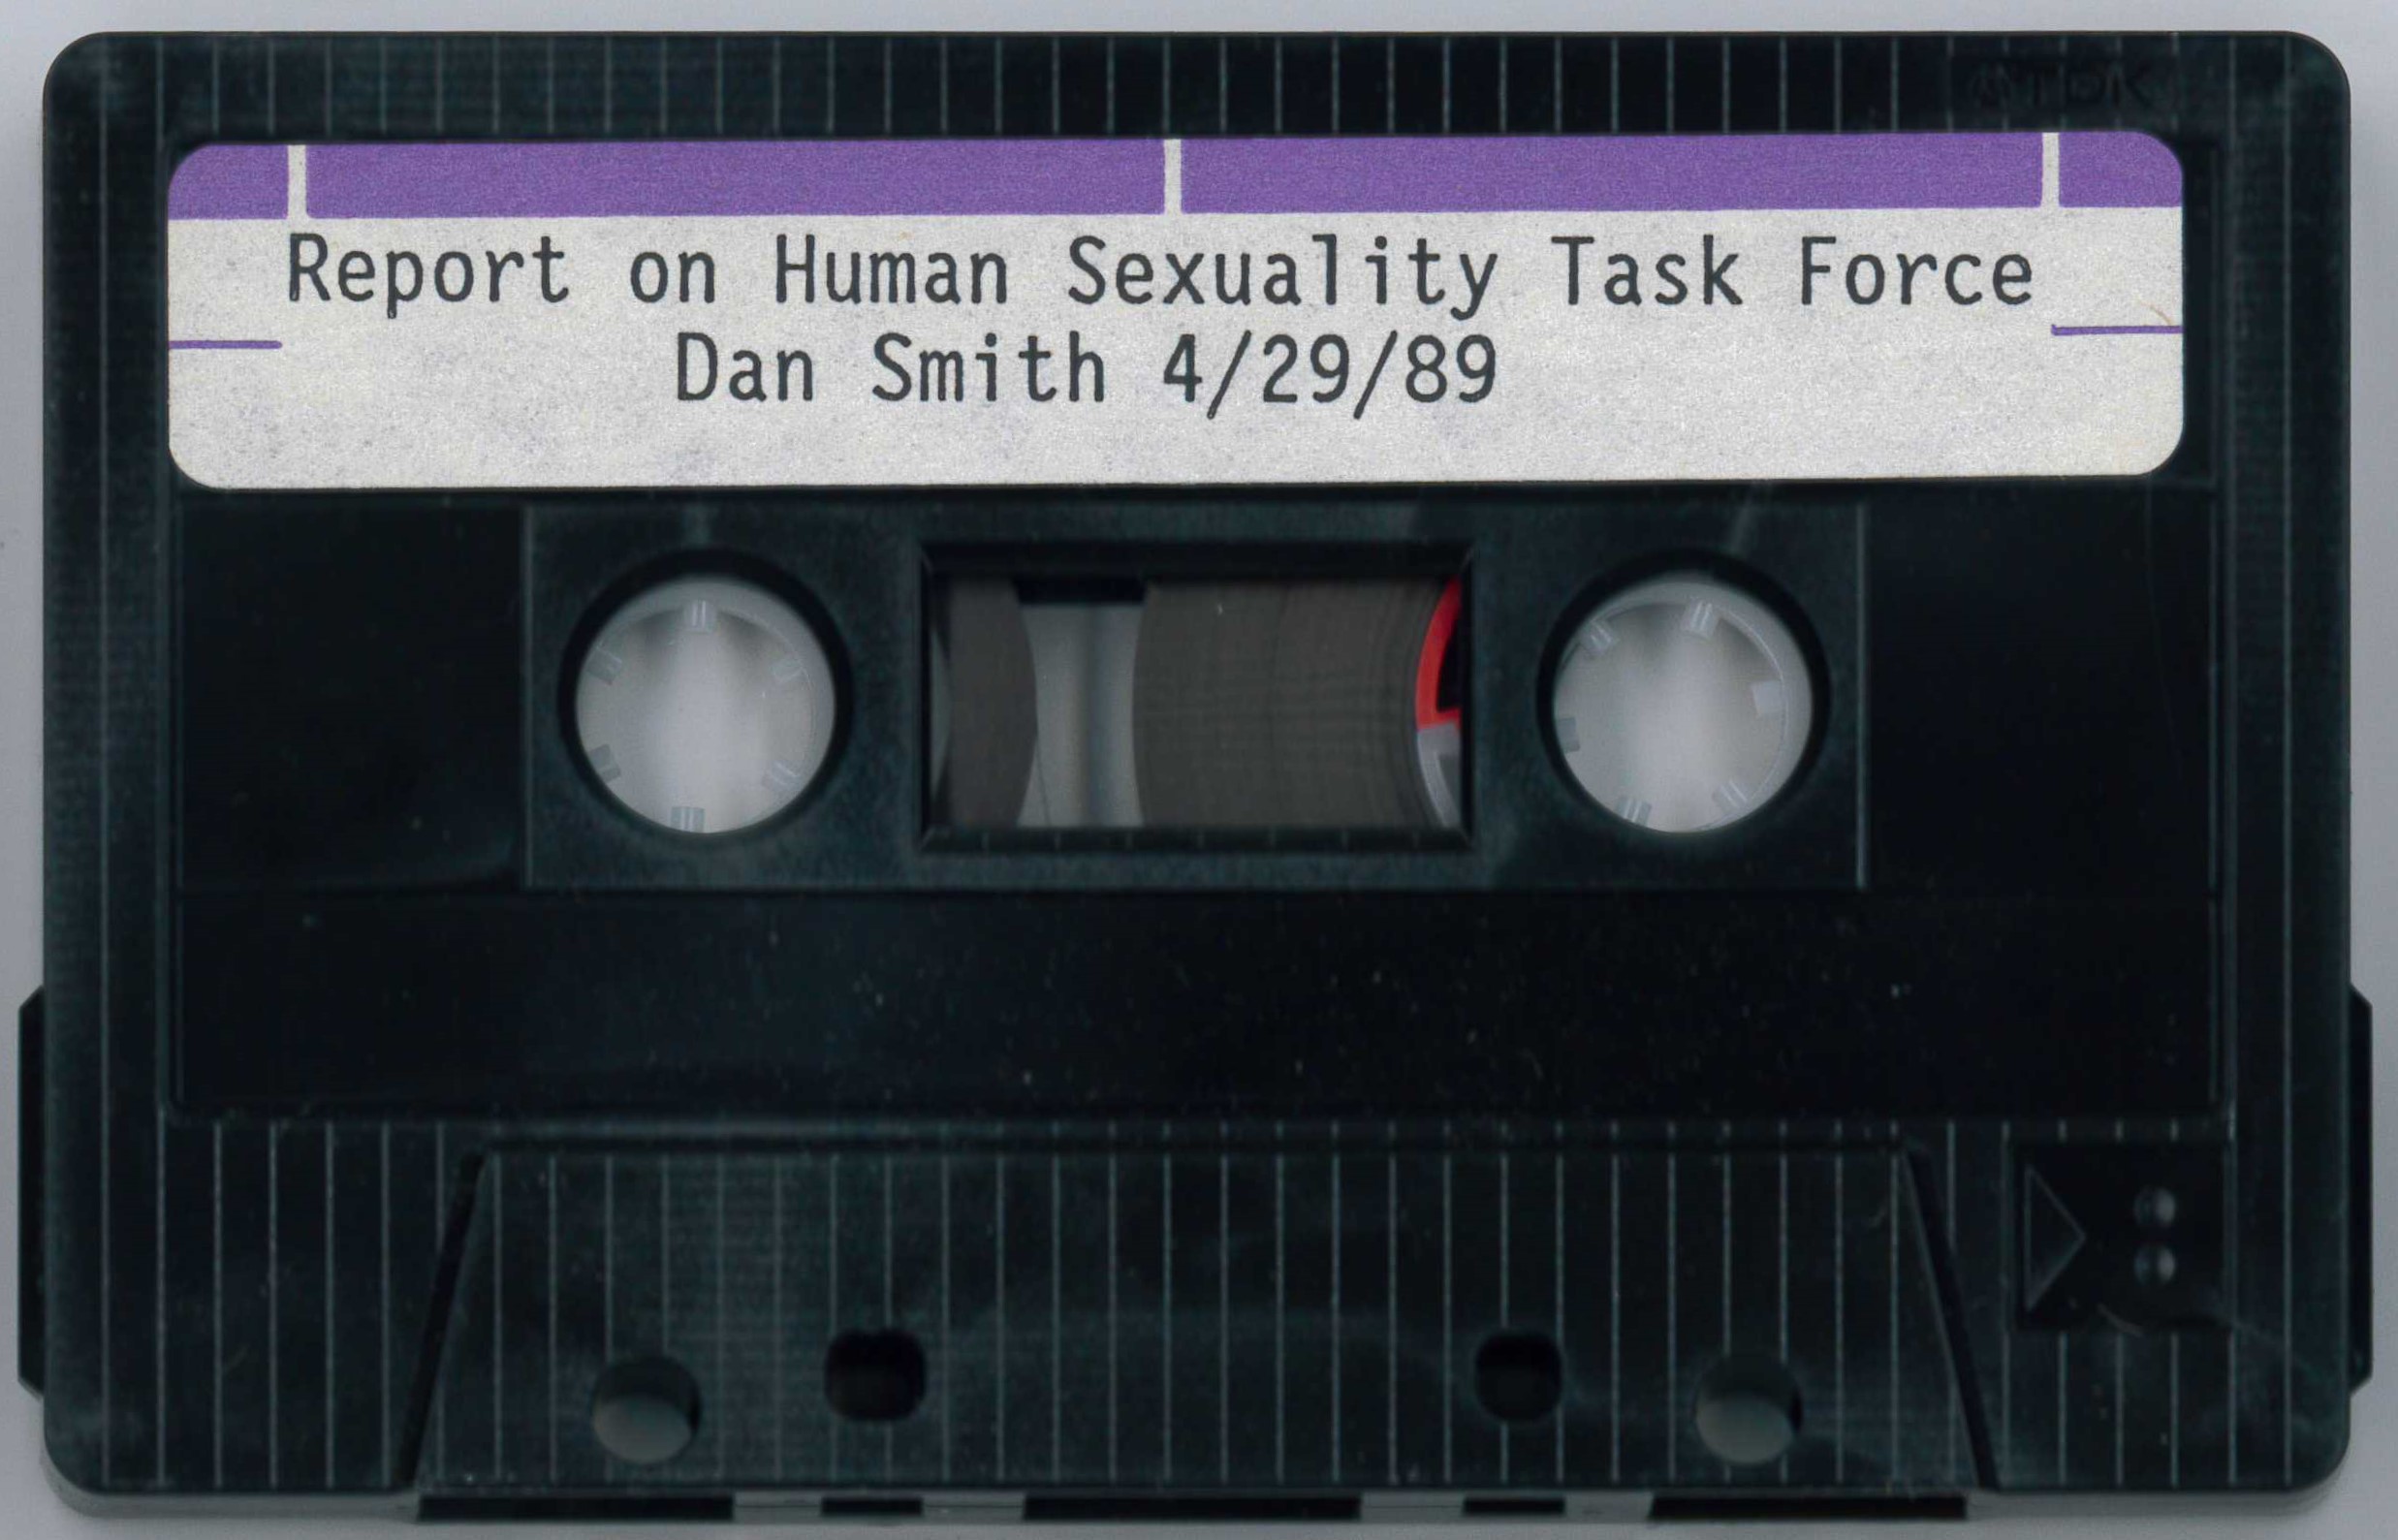 Report on the Human Sexuality Task Force, Dan Smith, More Light Presbyterians gathering, 29 April 1989